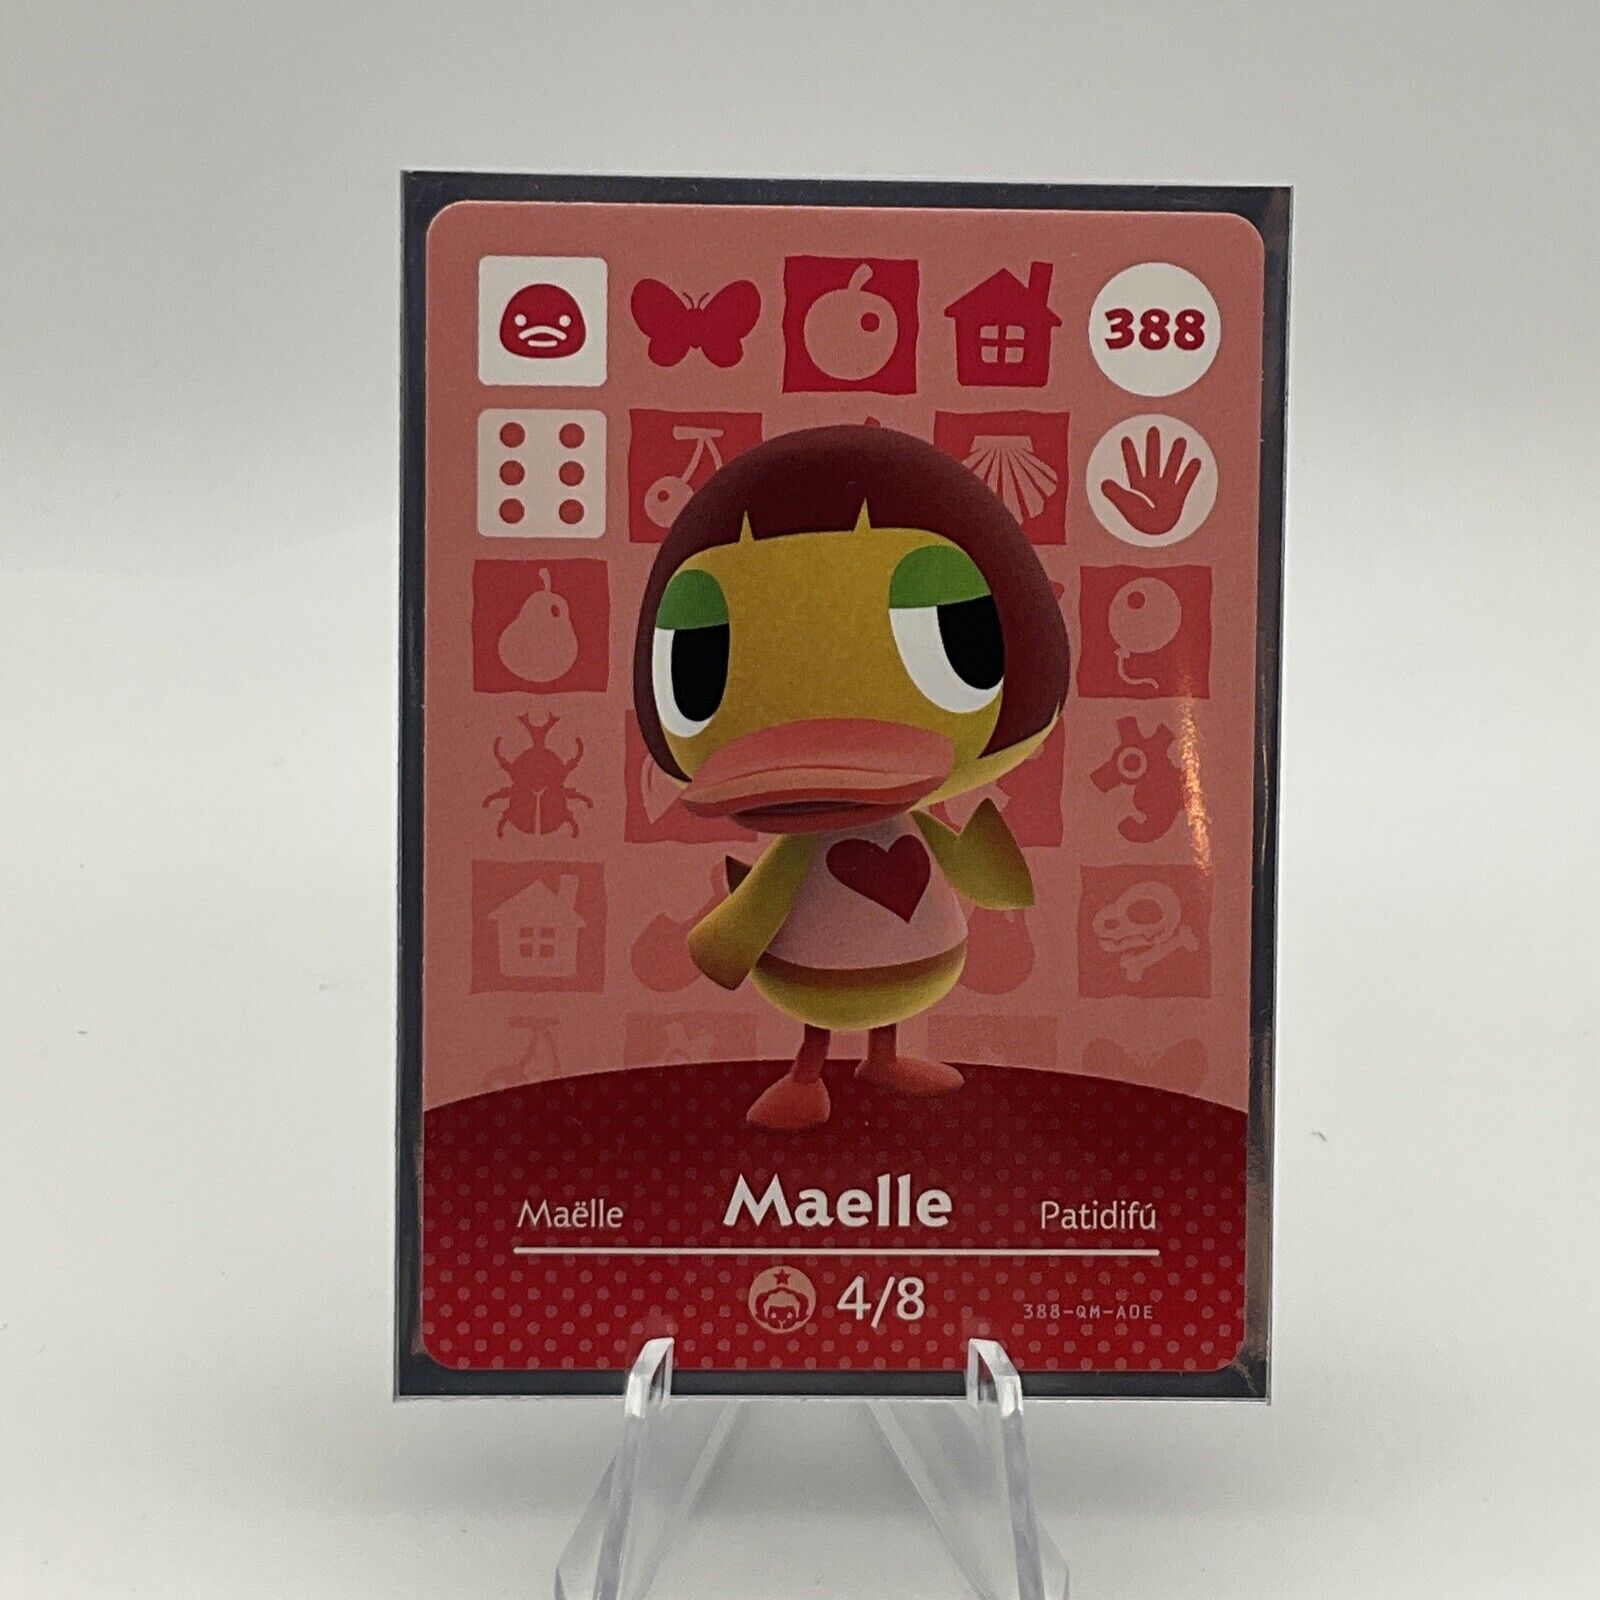 Animal Crossing Amiibo Authentic Nintendo Mint Card From - MAELLE #388